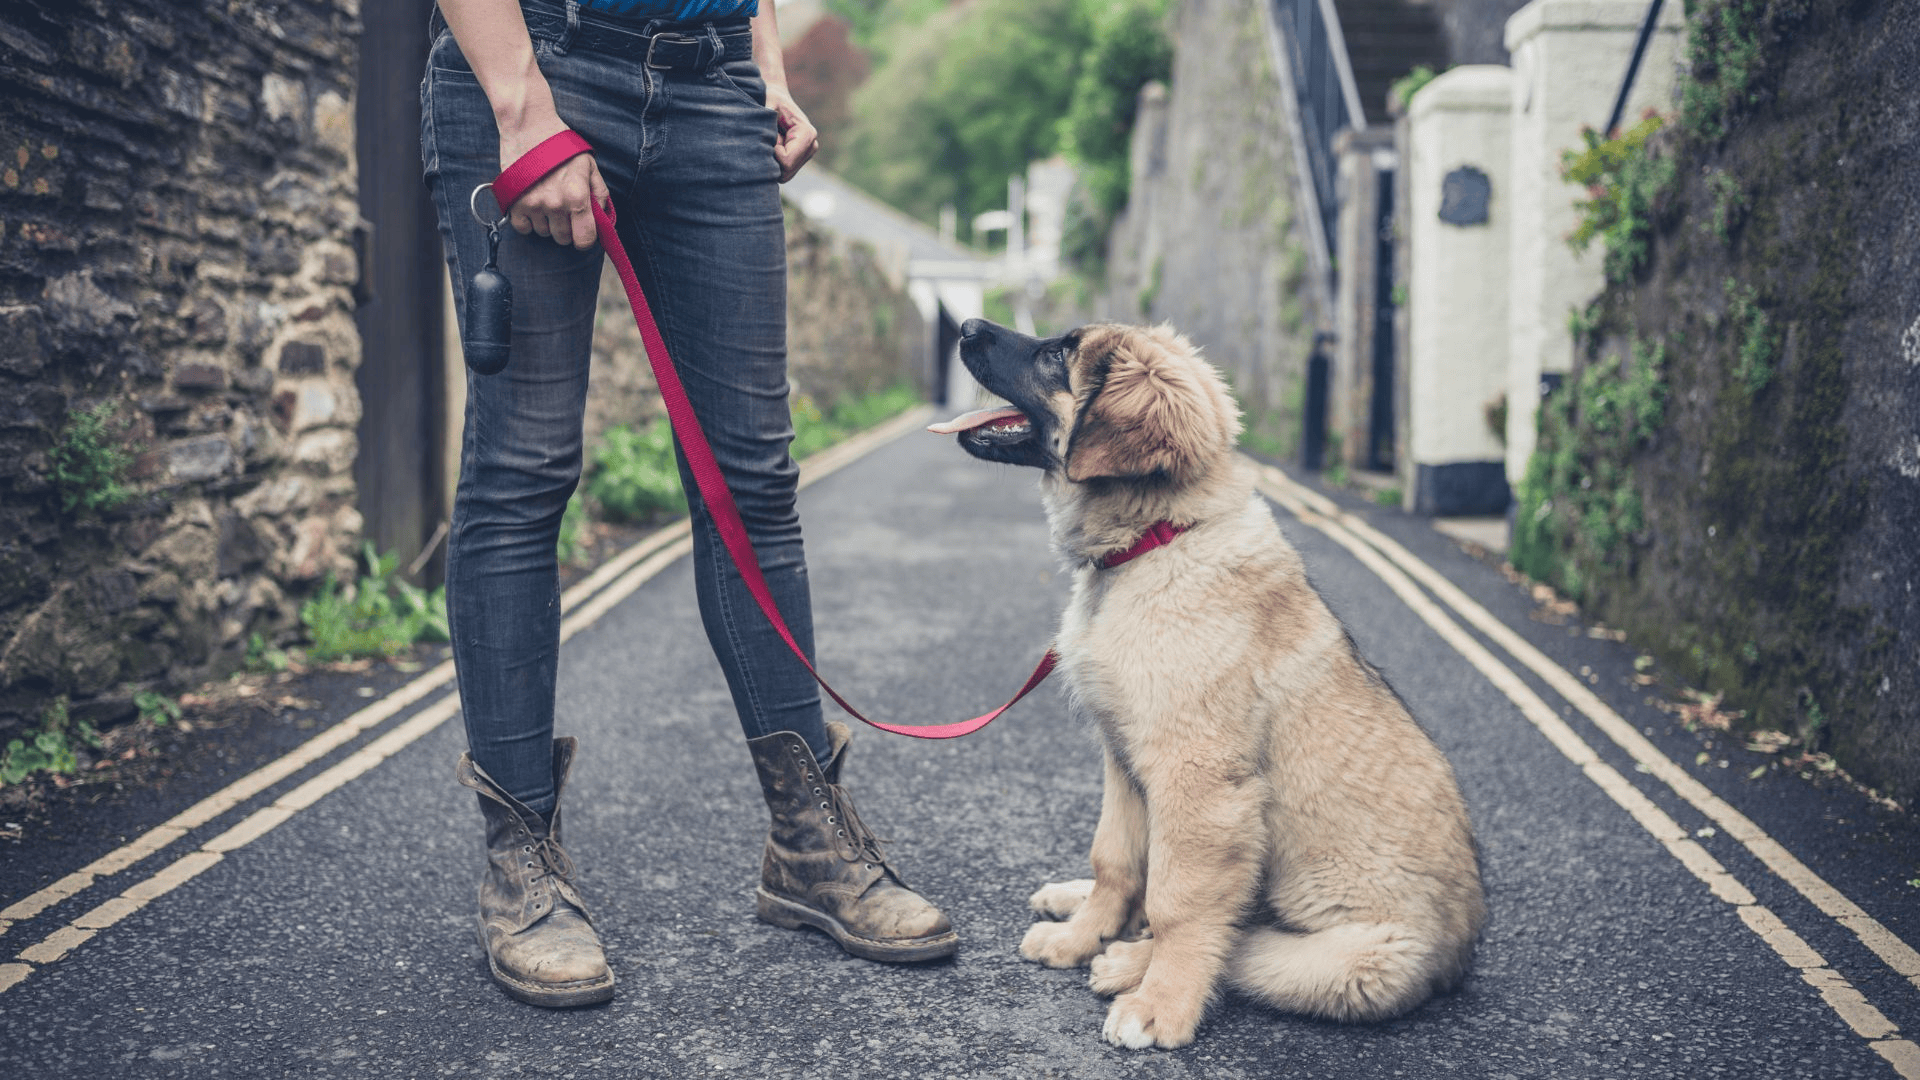 Professional dog trainers can help with severe leash problems. Leash training troubleshooting can only go so far sometimes. My top priority is always keeping my dog safe.